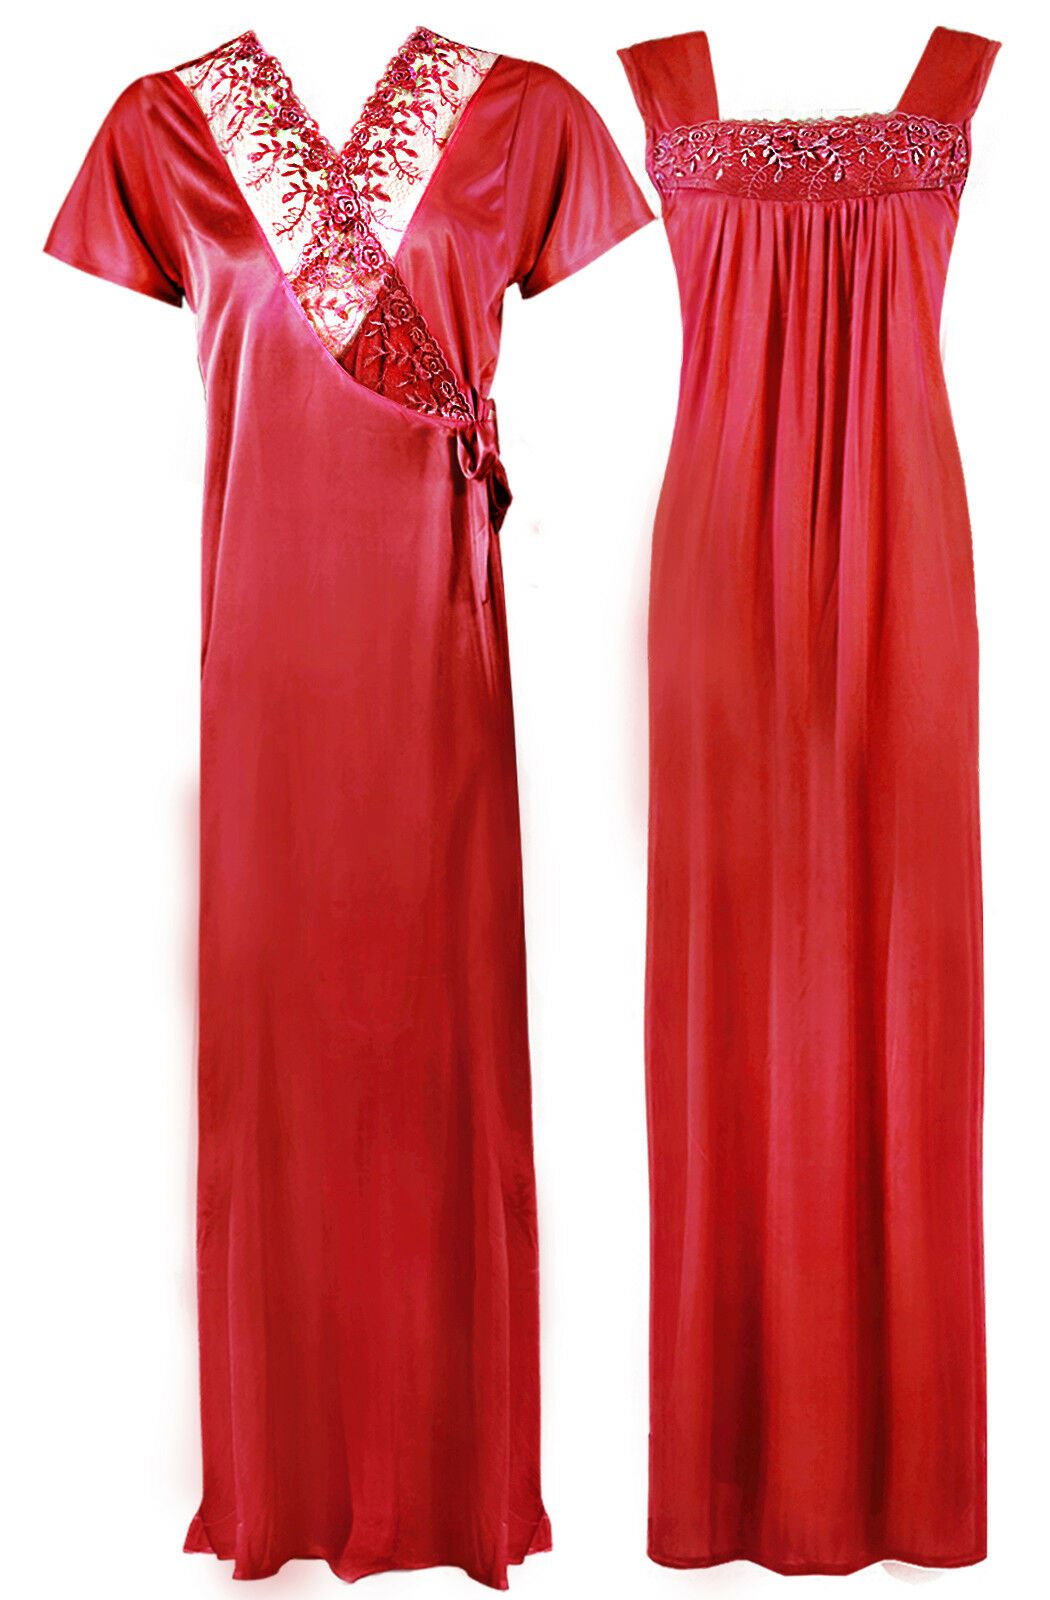 Red / One Size WOMENS LONG SATIN CHEMISE NIGHTIE NIGHTDRESS LADIES DRESSING GOWN 2PC SET 8-16 The Orange Tags